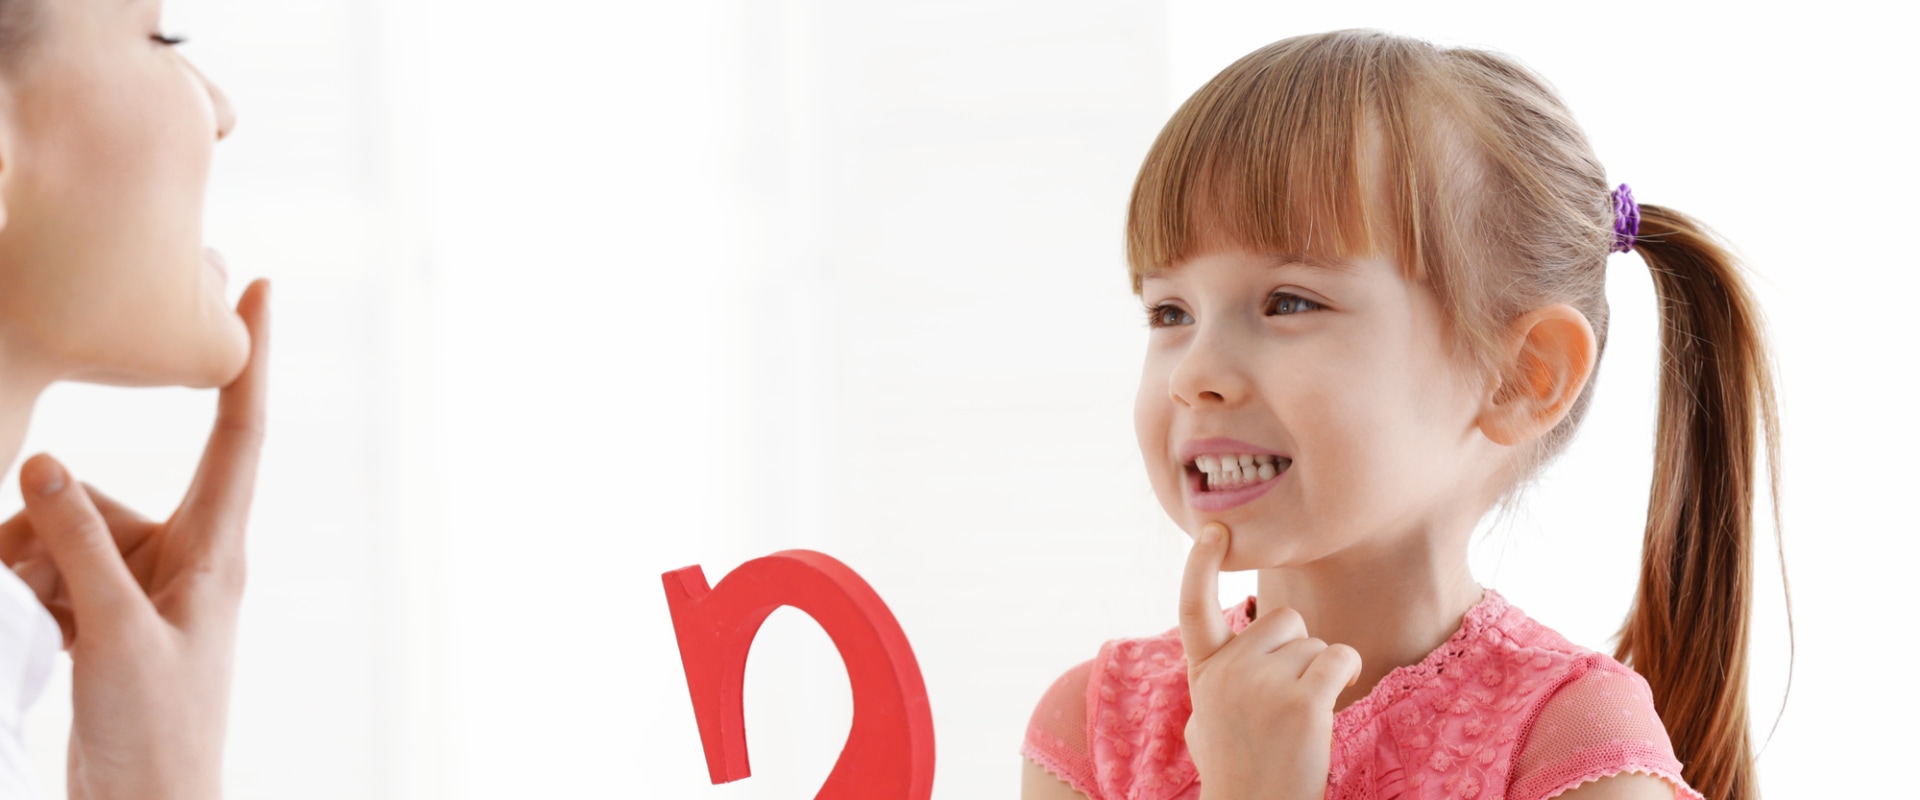 What are speech disorders in children?